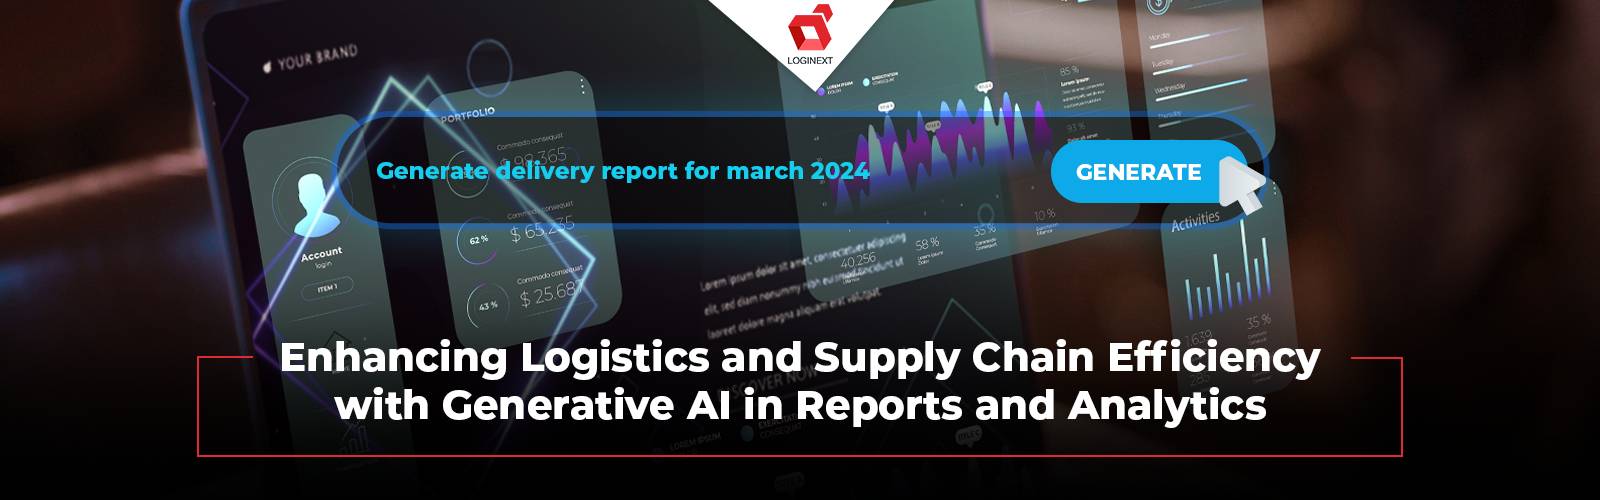 Enhancing Logistics and Supply Chain Efficiency with Generative AI in Reports and Analytics